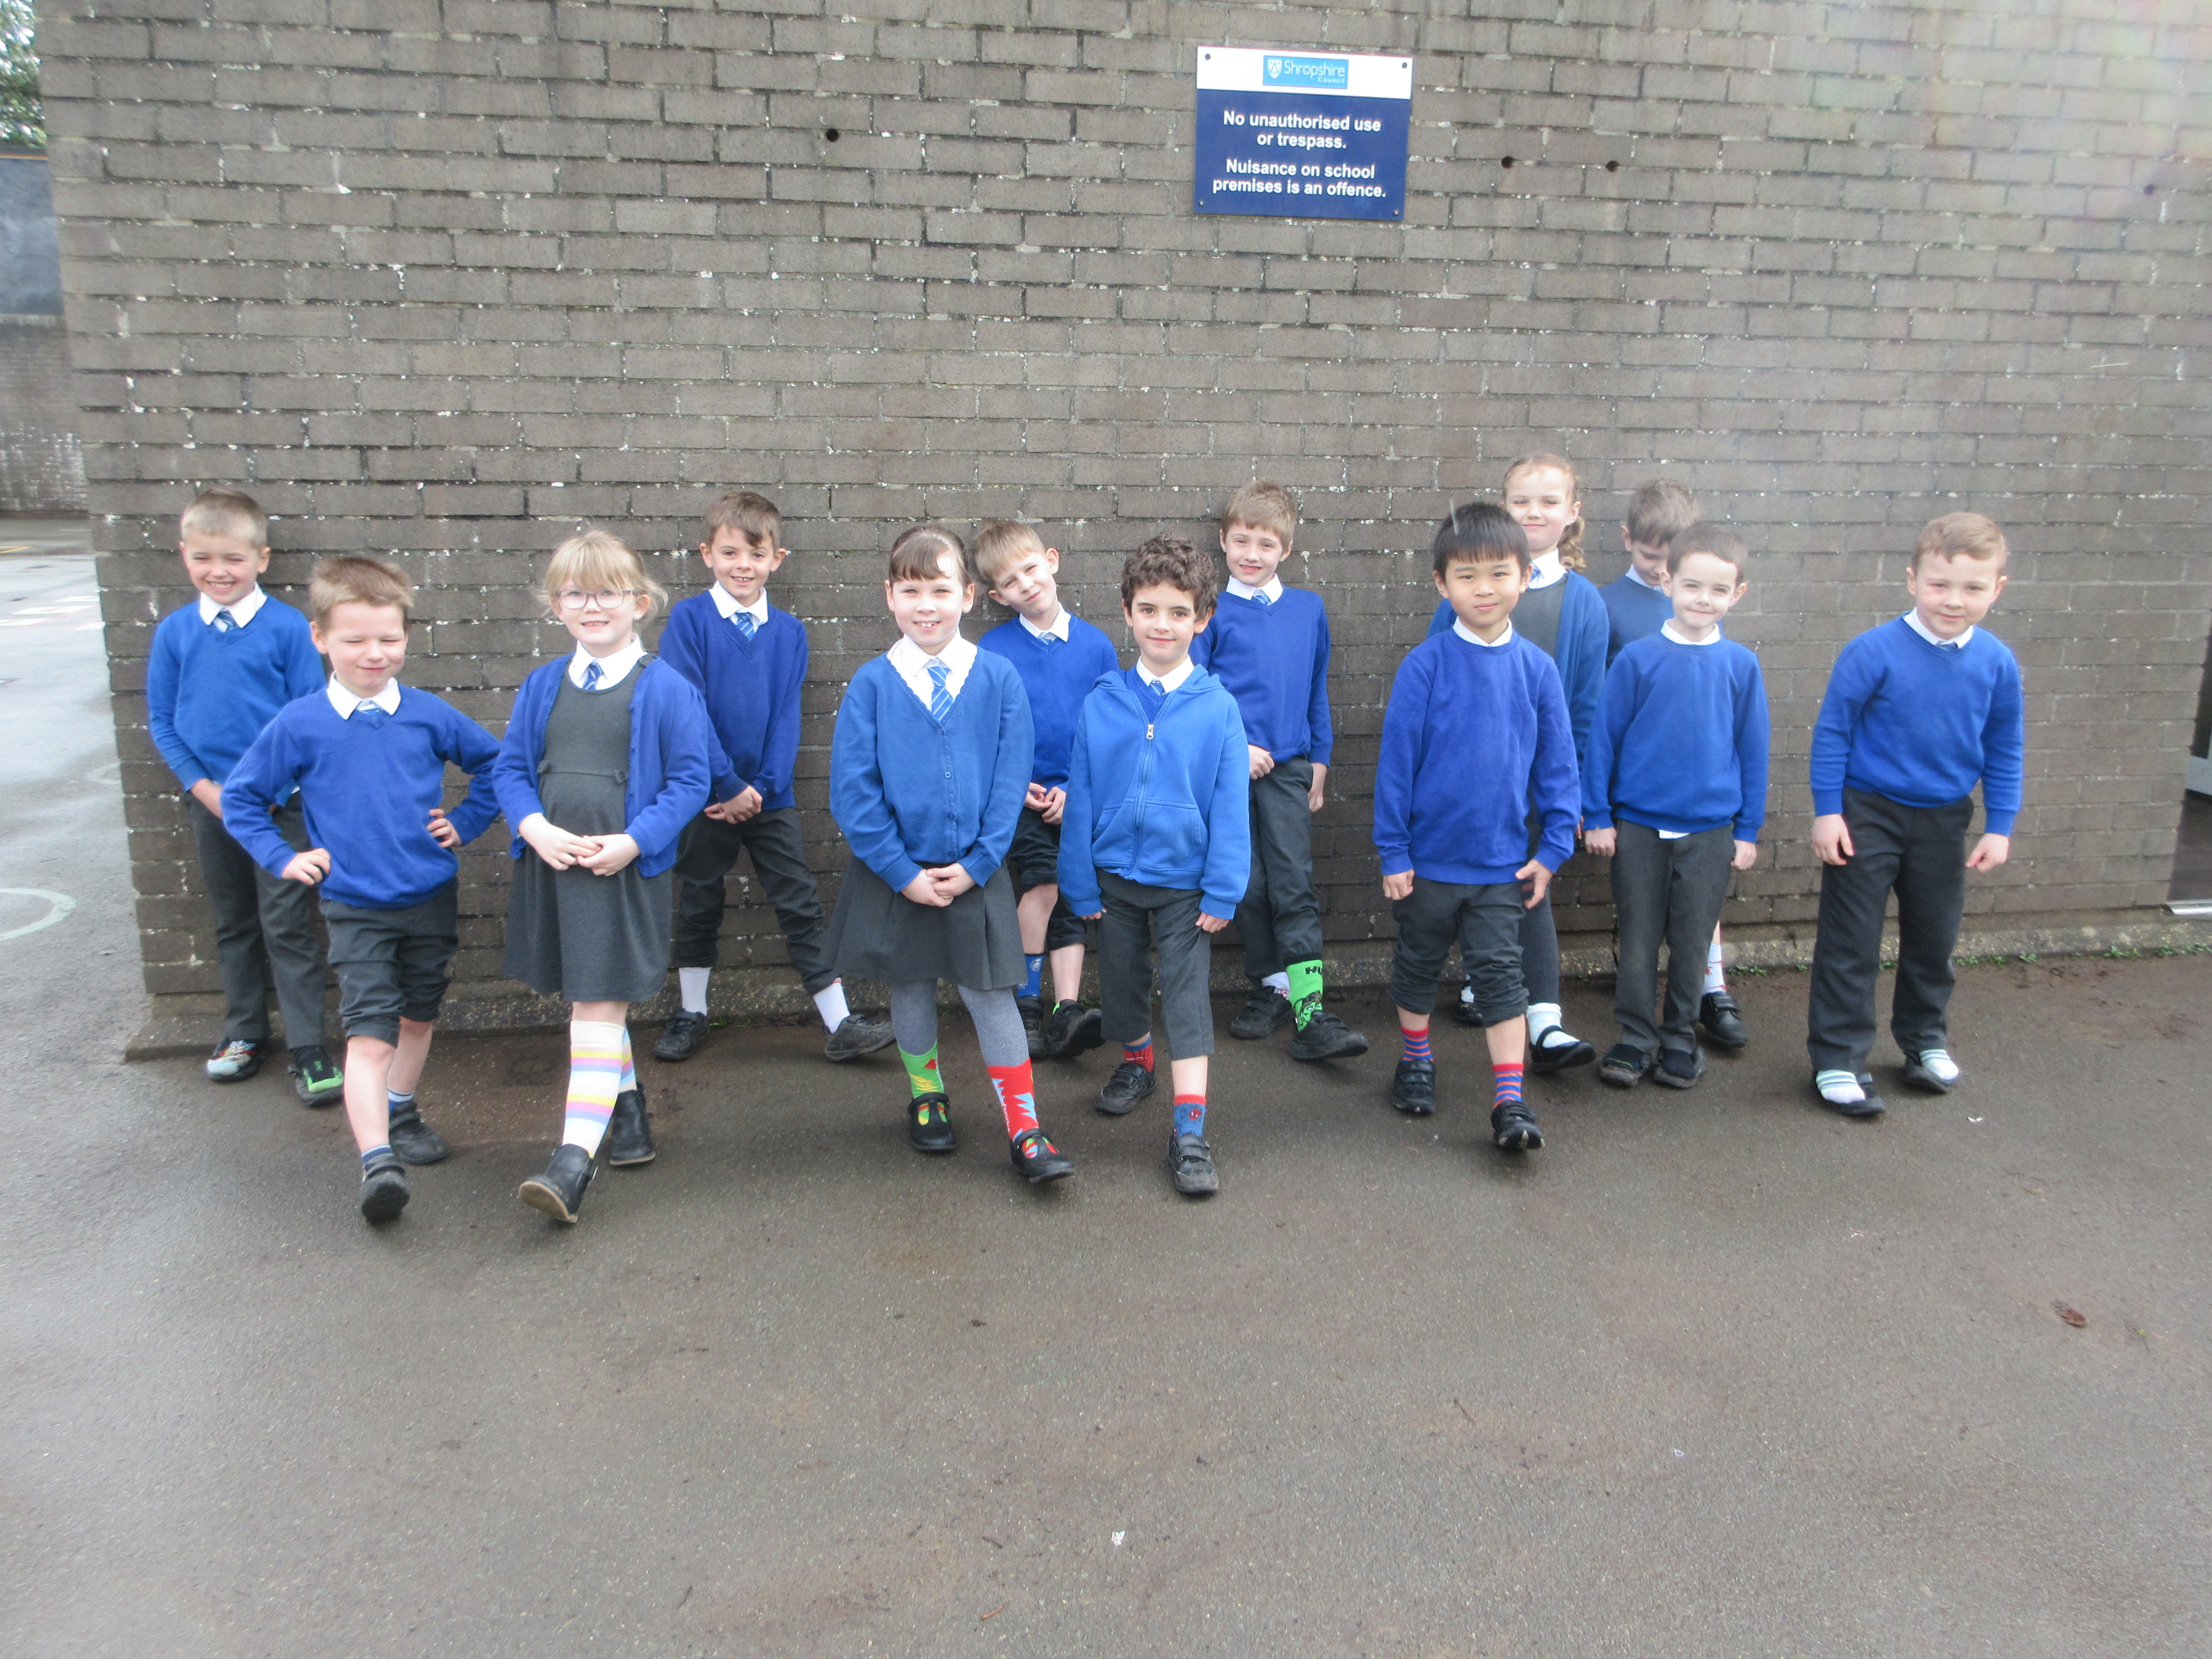 We wore odd socks or silly socks to school to support Down Syndrome Day.